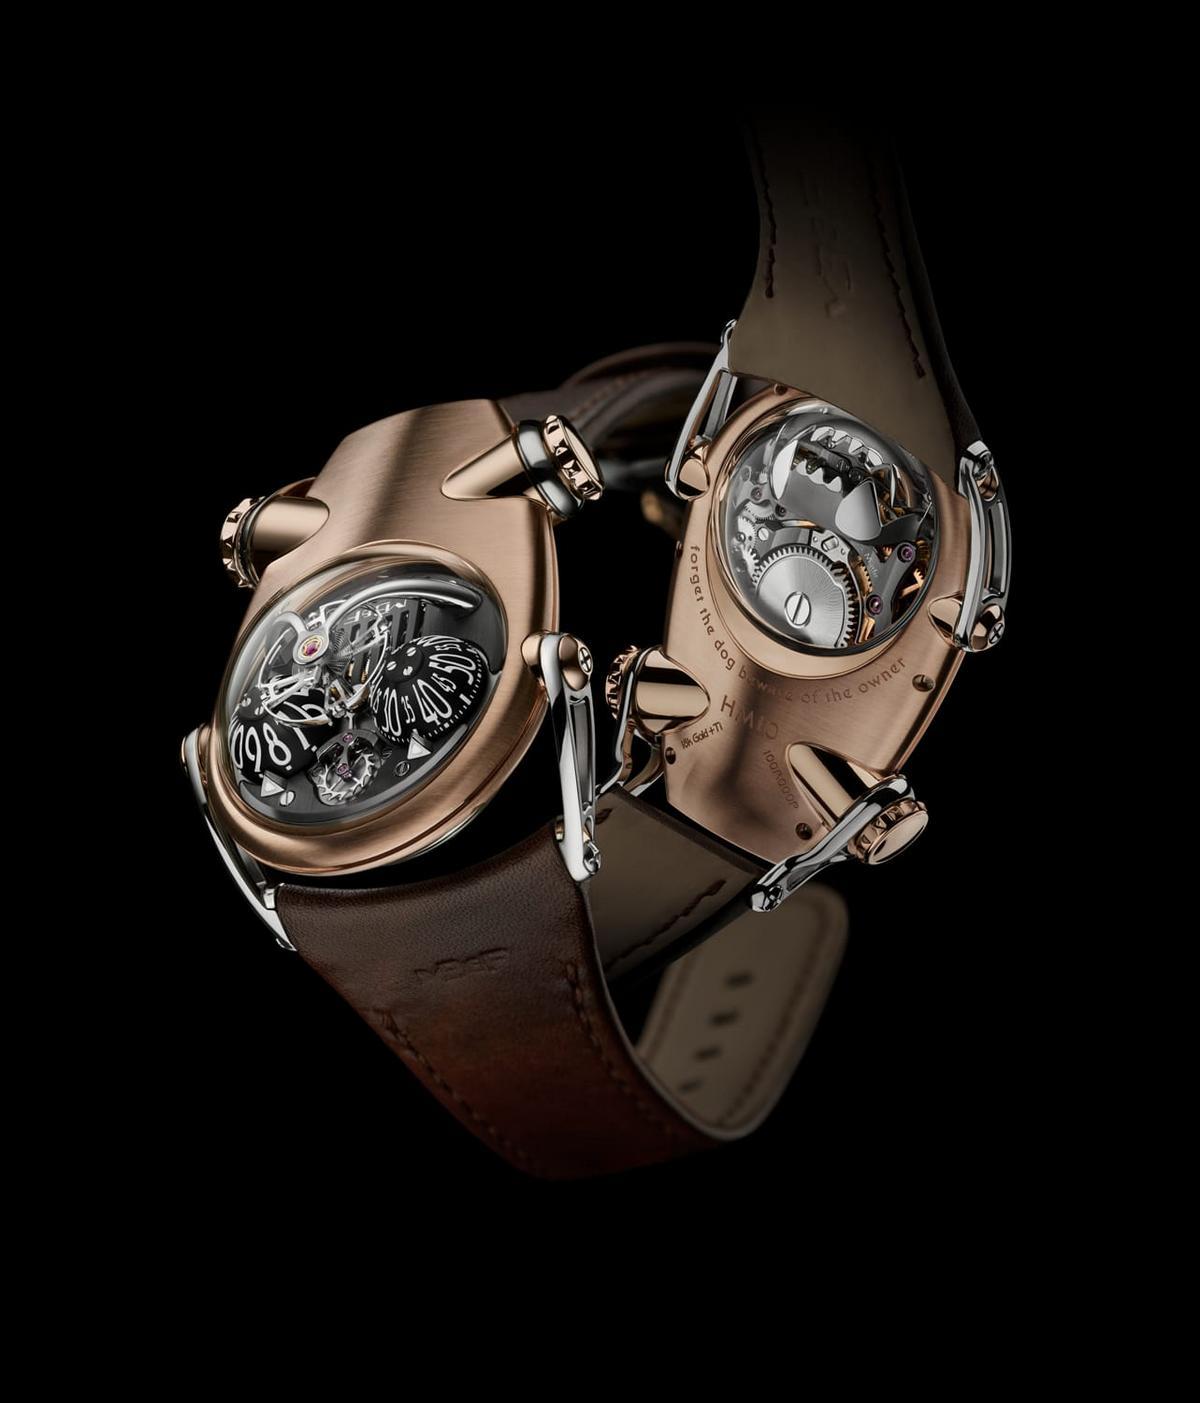 MB&F?s latest bulldog-inspired Horological Machine has a mechanical jaw as its power reserve indicator